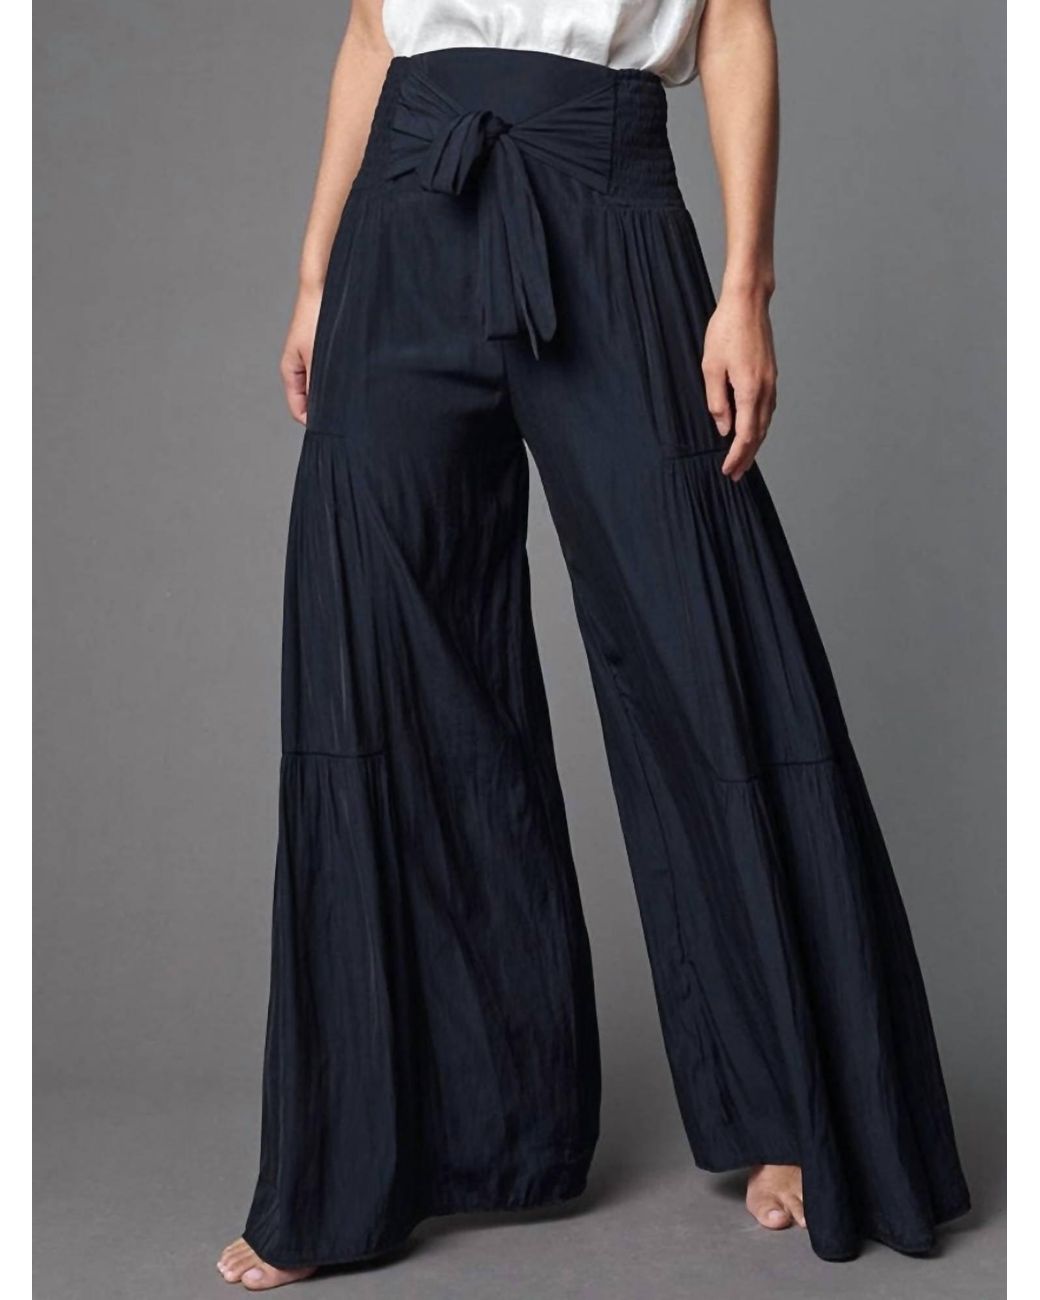 Lola & Sophie Belted Wide Leg Pant in Blue | Lyst